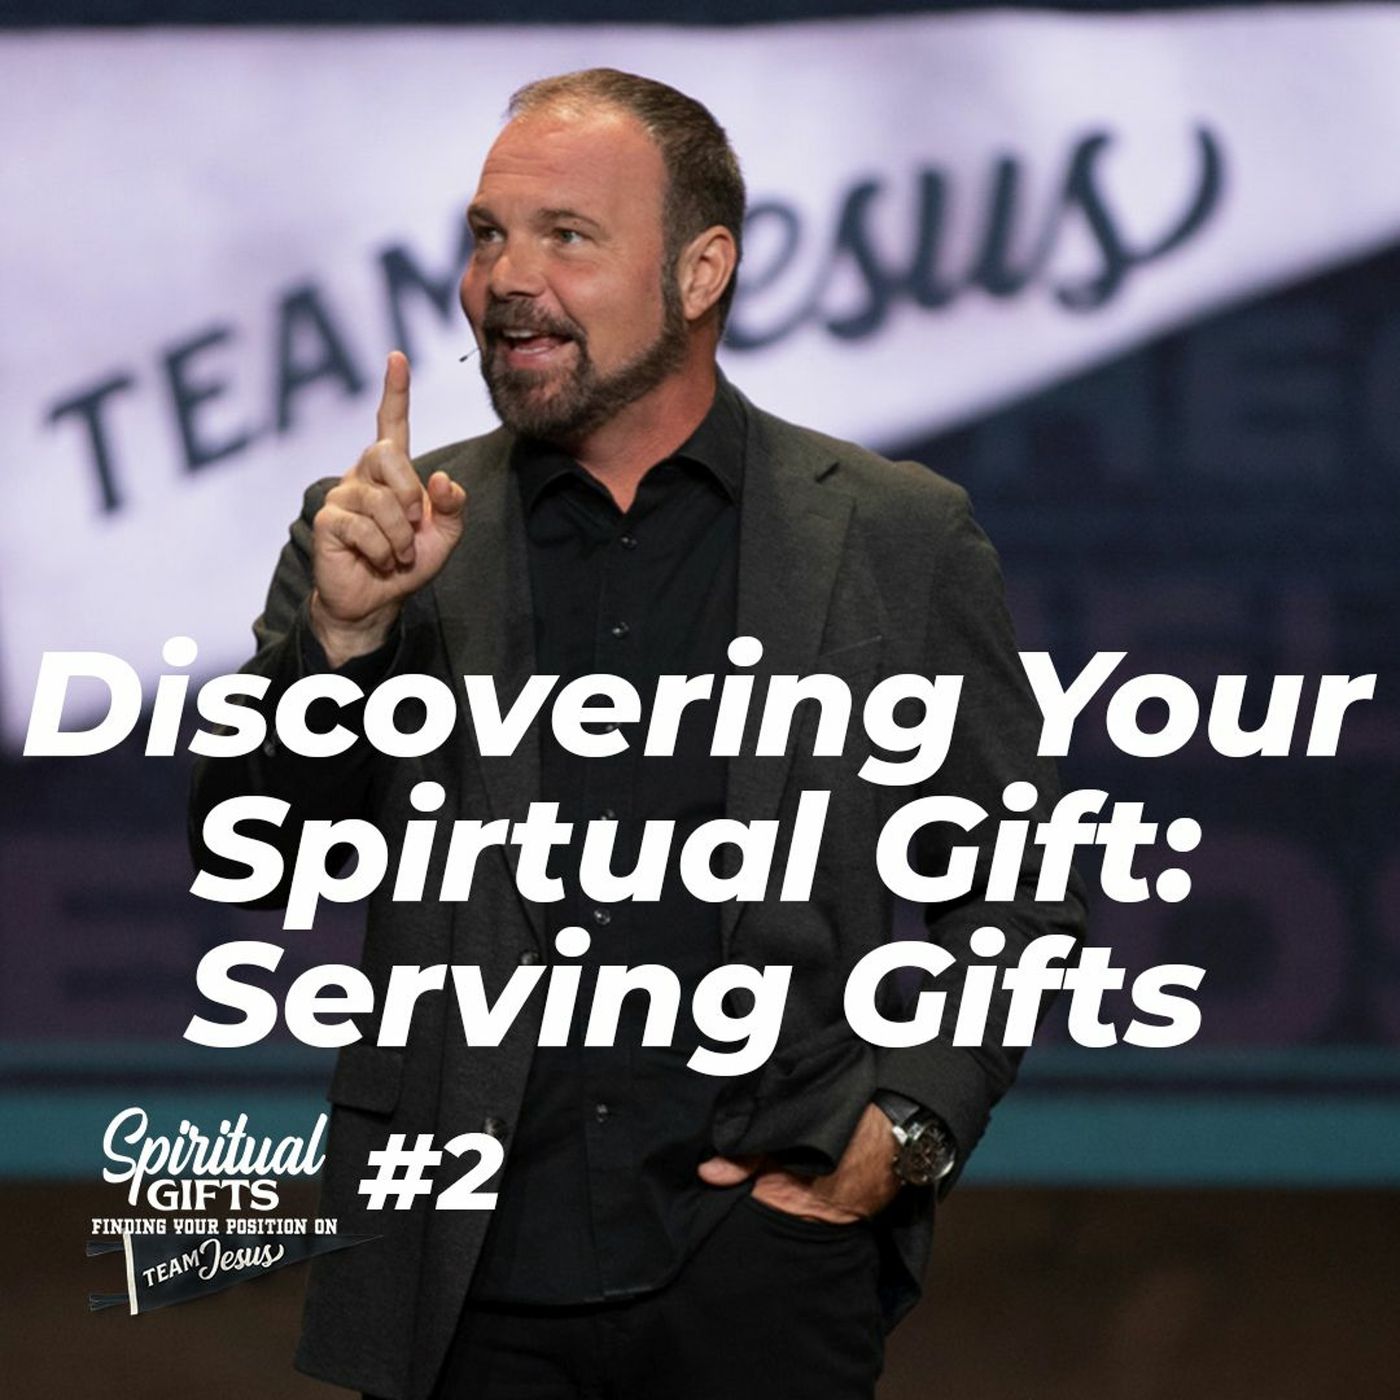 Spiritual Gifts #2 - Discovering Your Spiritual Gift: Serving Gifts